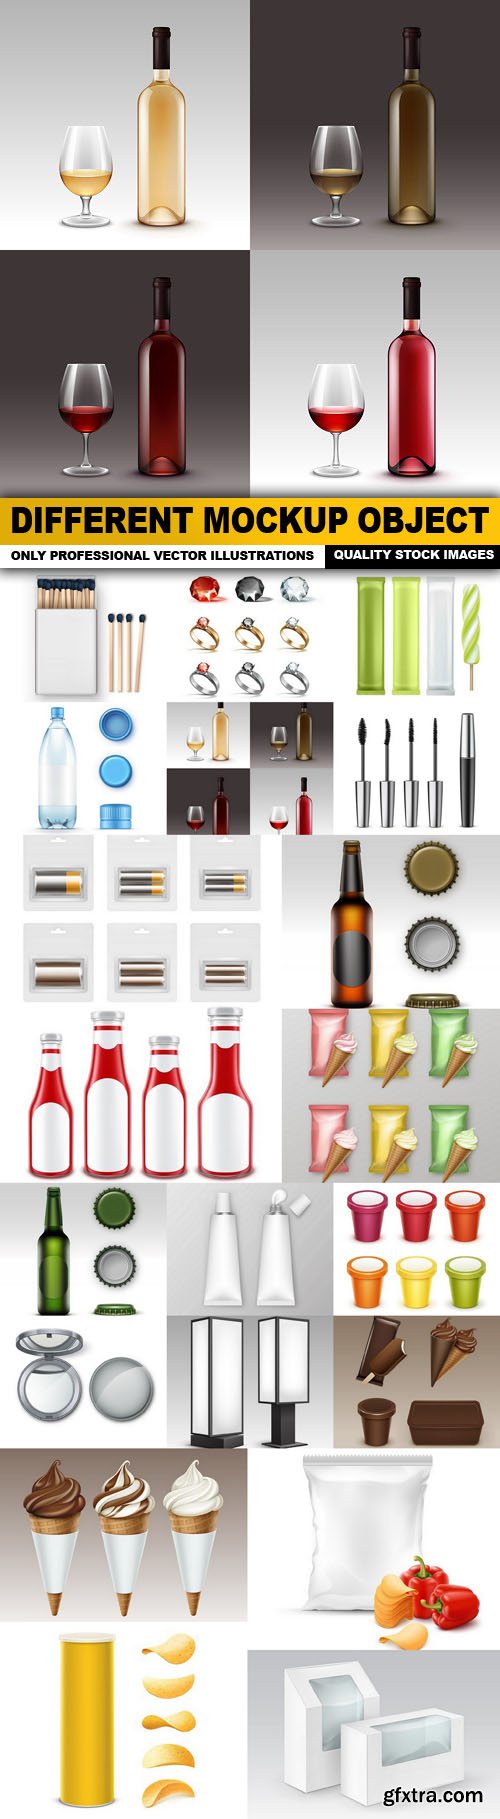 Different Mockup Object - 20 Vector